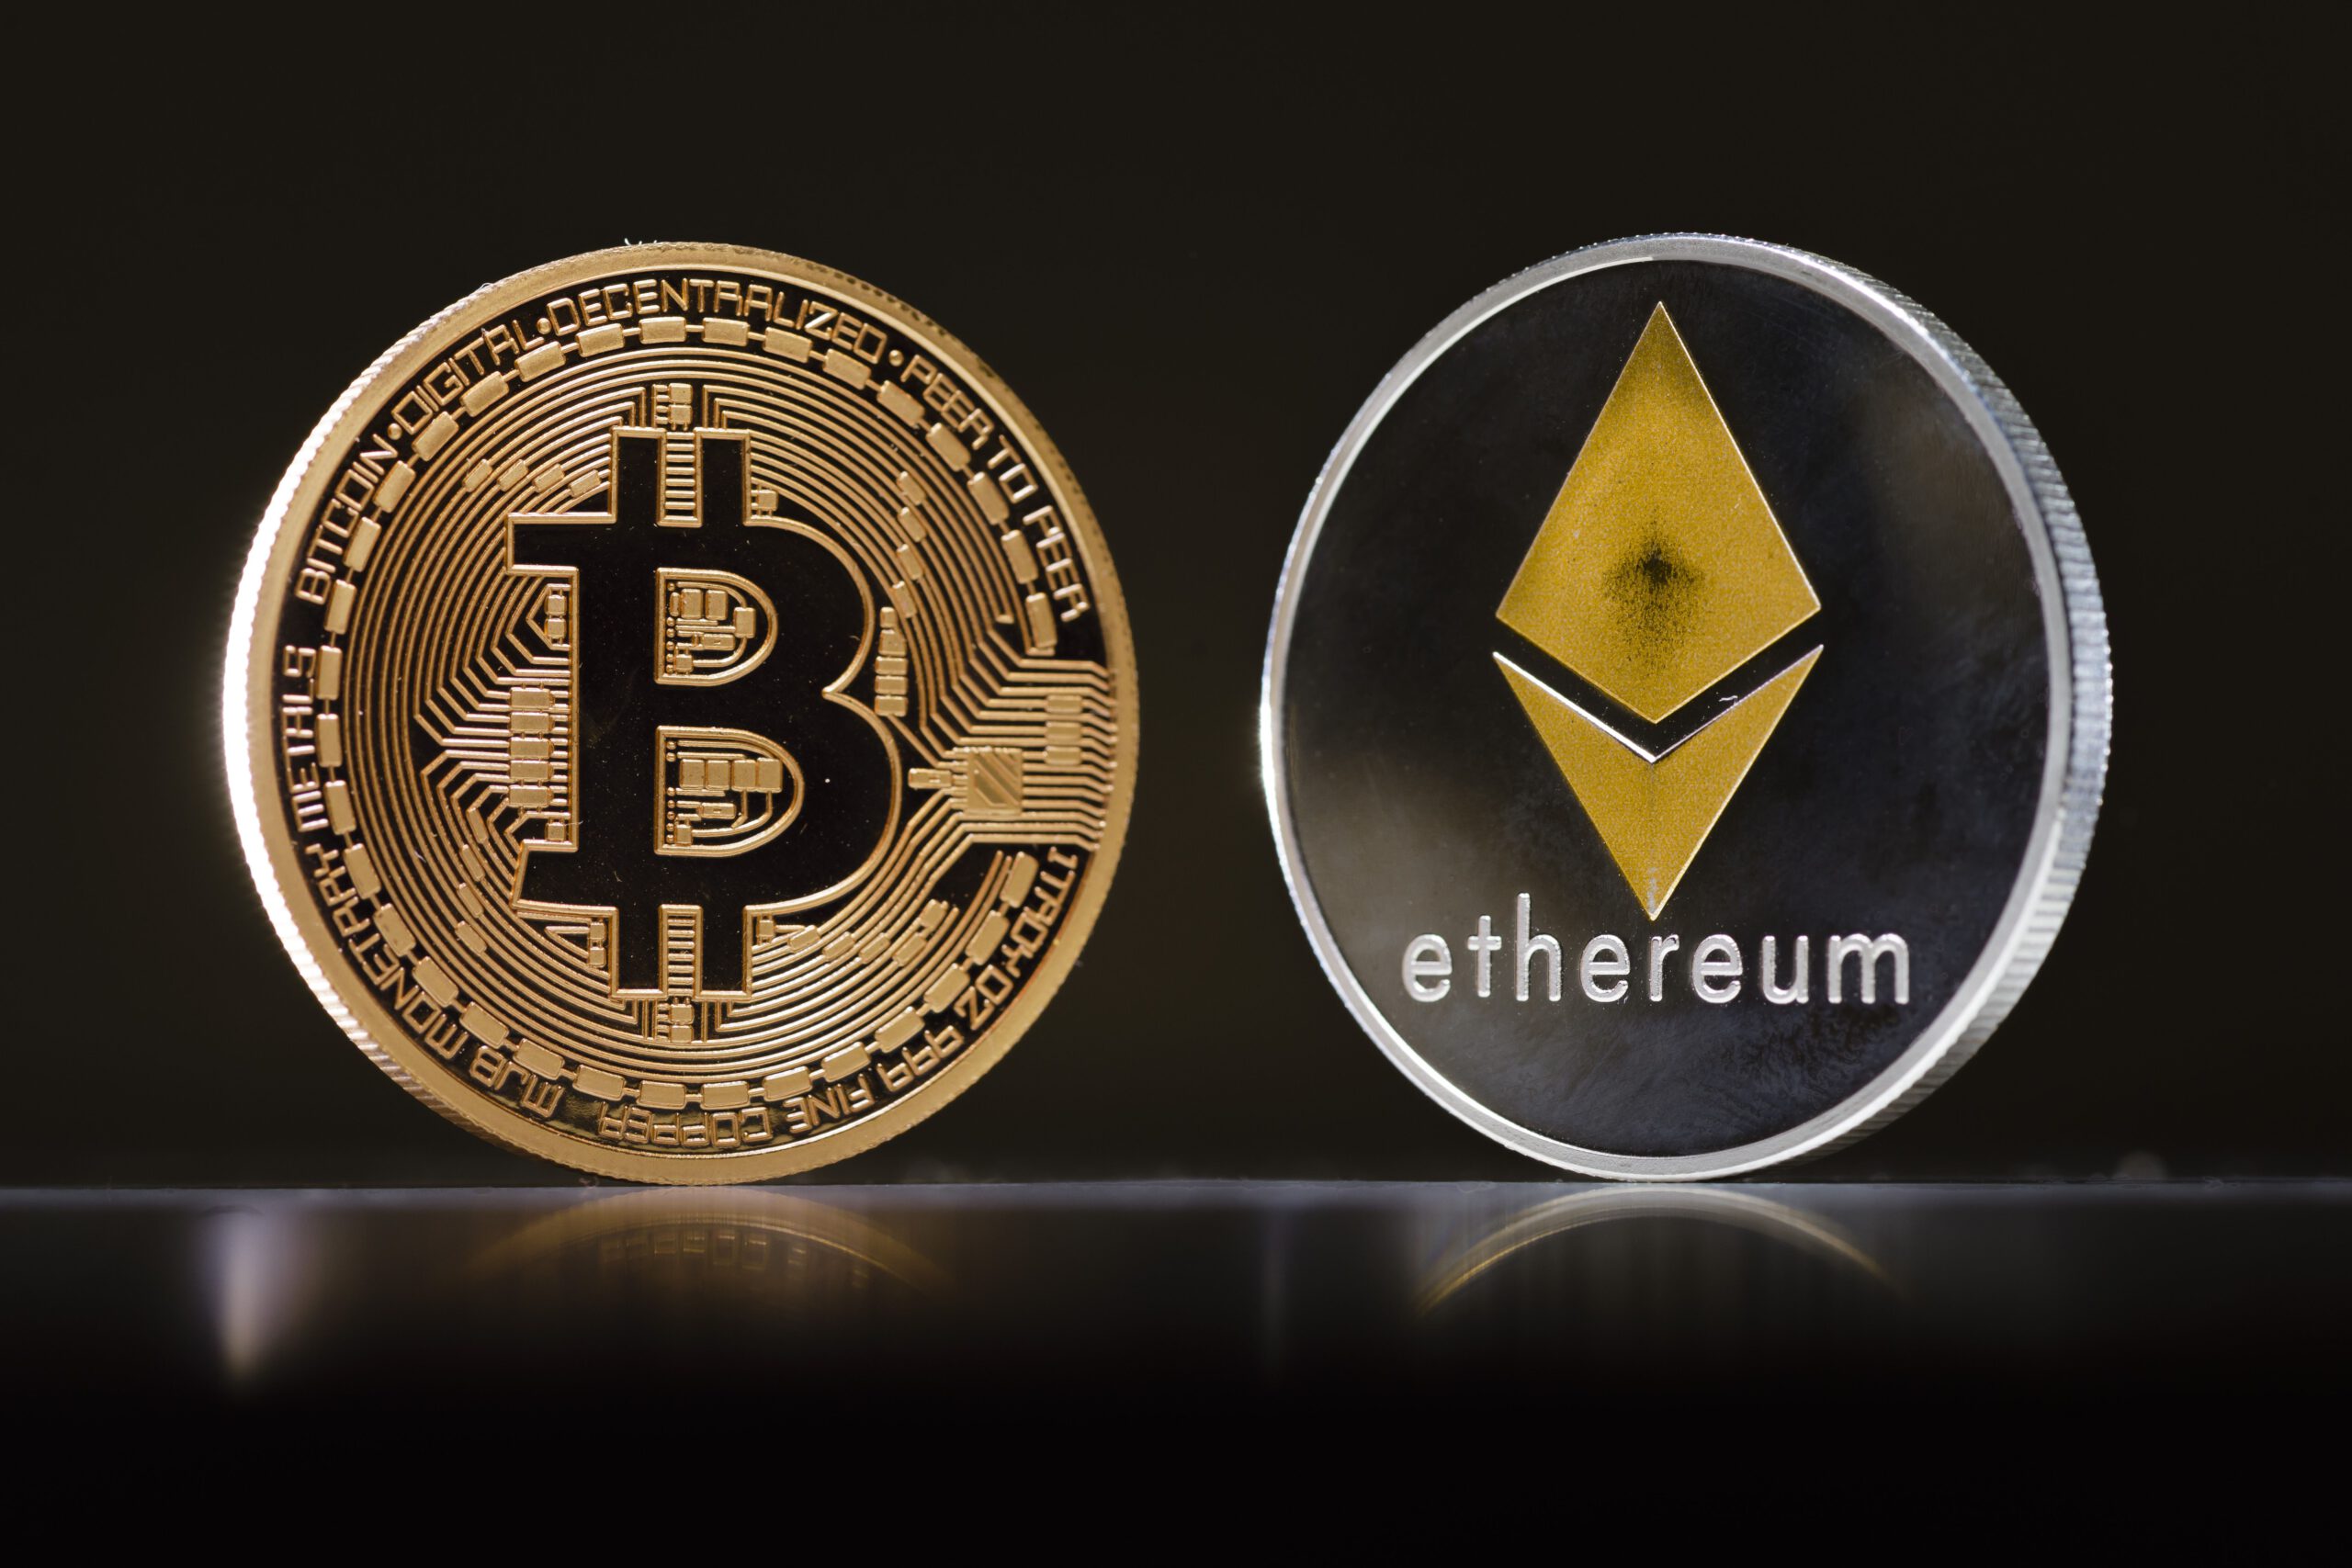 Ethereum begins to realize its leadership potential against the backdrop of conservative bitcoin